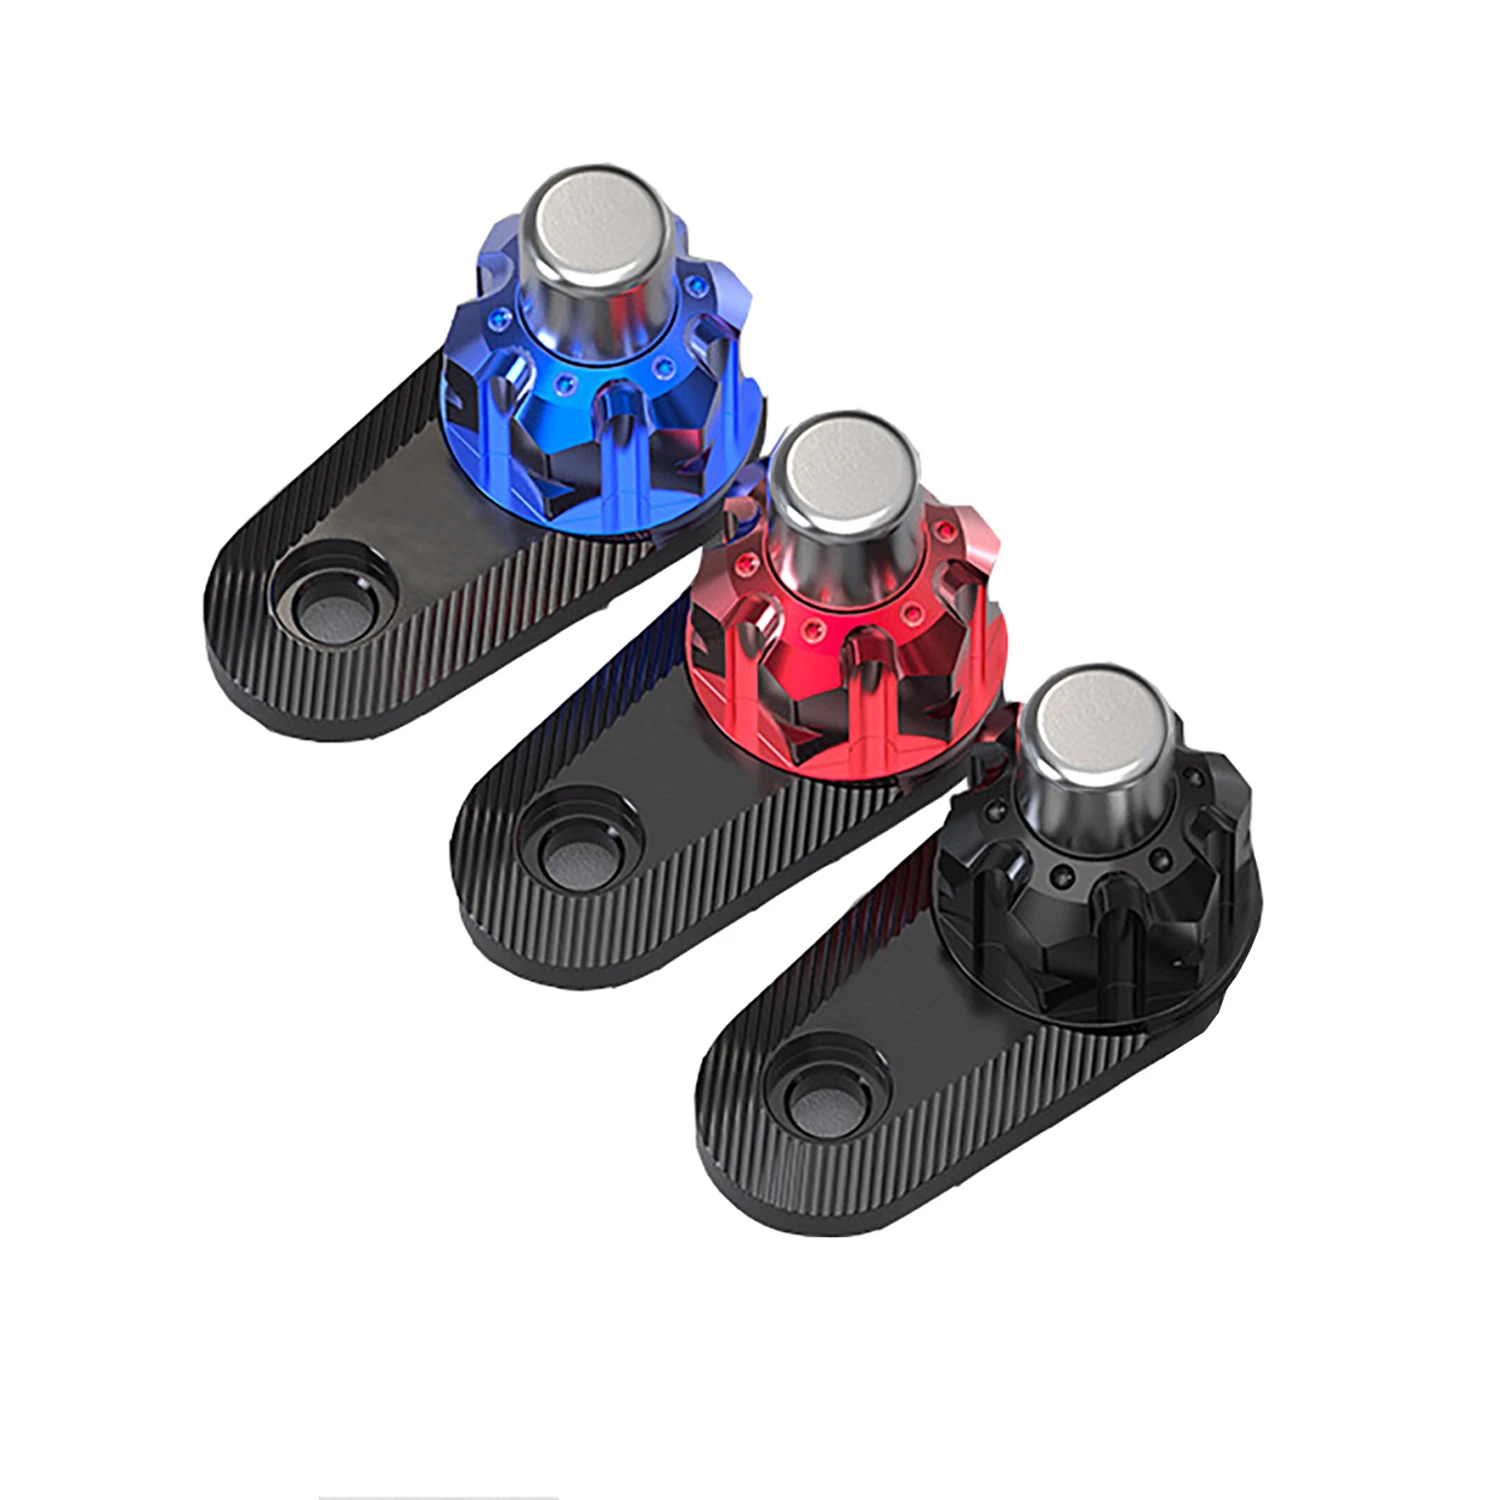 

1 Piece Motorcycle Parking Brake Switch Red Black Blue Aluminium Alloy Semi-Automatic Brake Control Lock for Most Motorbike